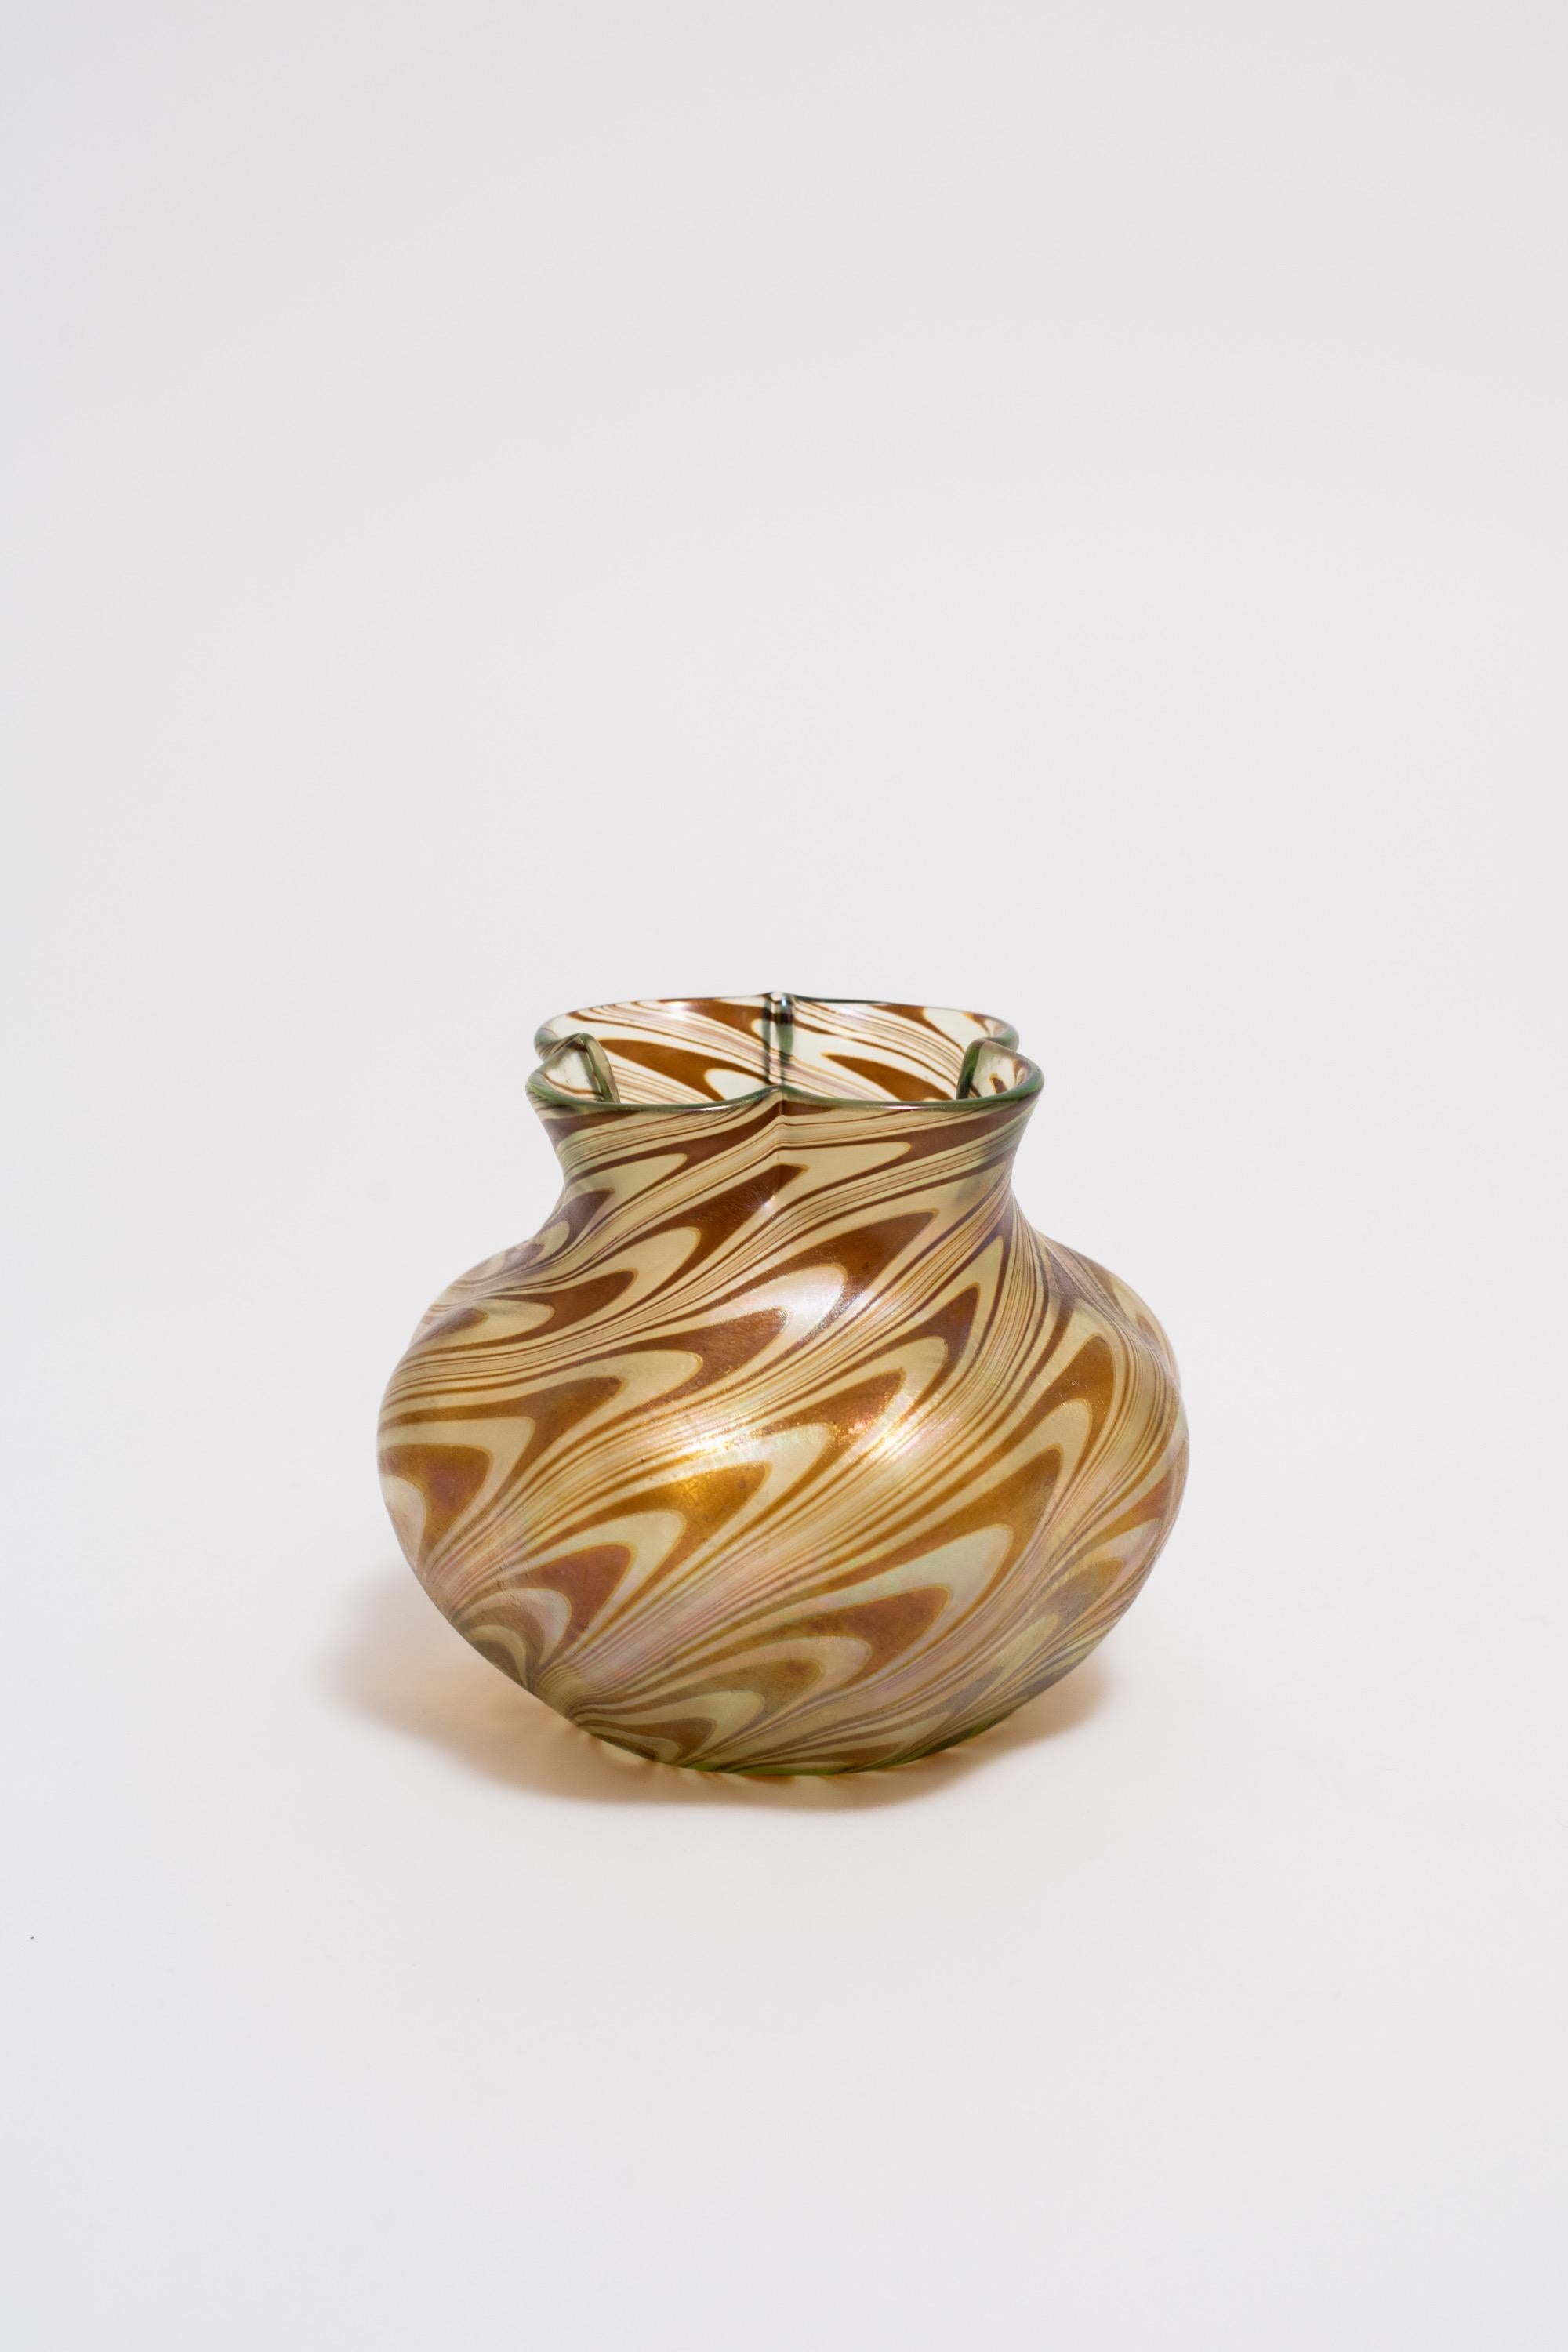 A glass vase by Loetz, the premier art glass producer of the Art Nouveau period in Bohemia (present day Czech Republic). This vase is an example of the Phanomen genre of glass decor, defined by colorful, organic forms spiraling upwards. In this